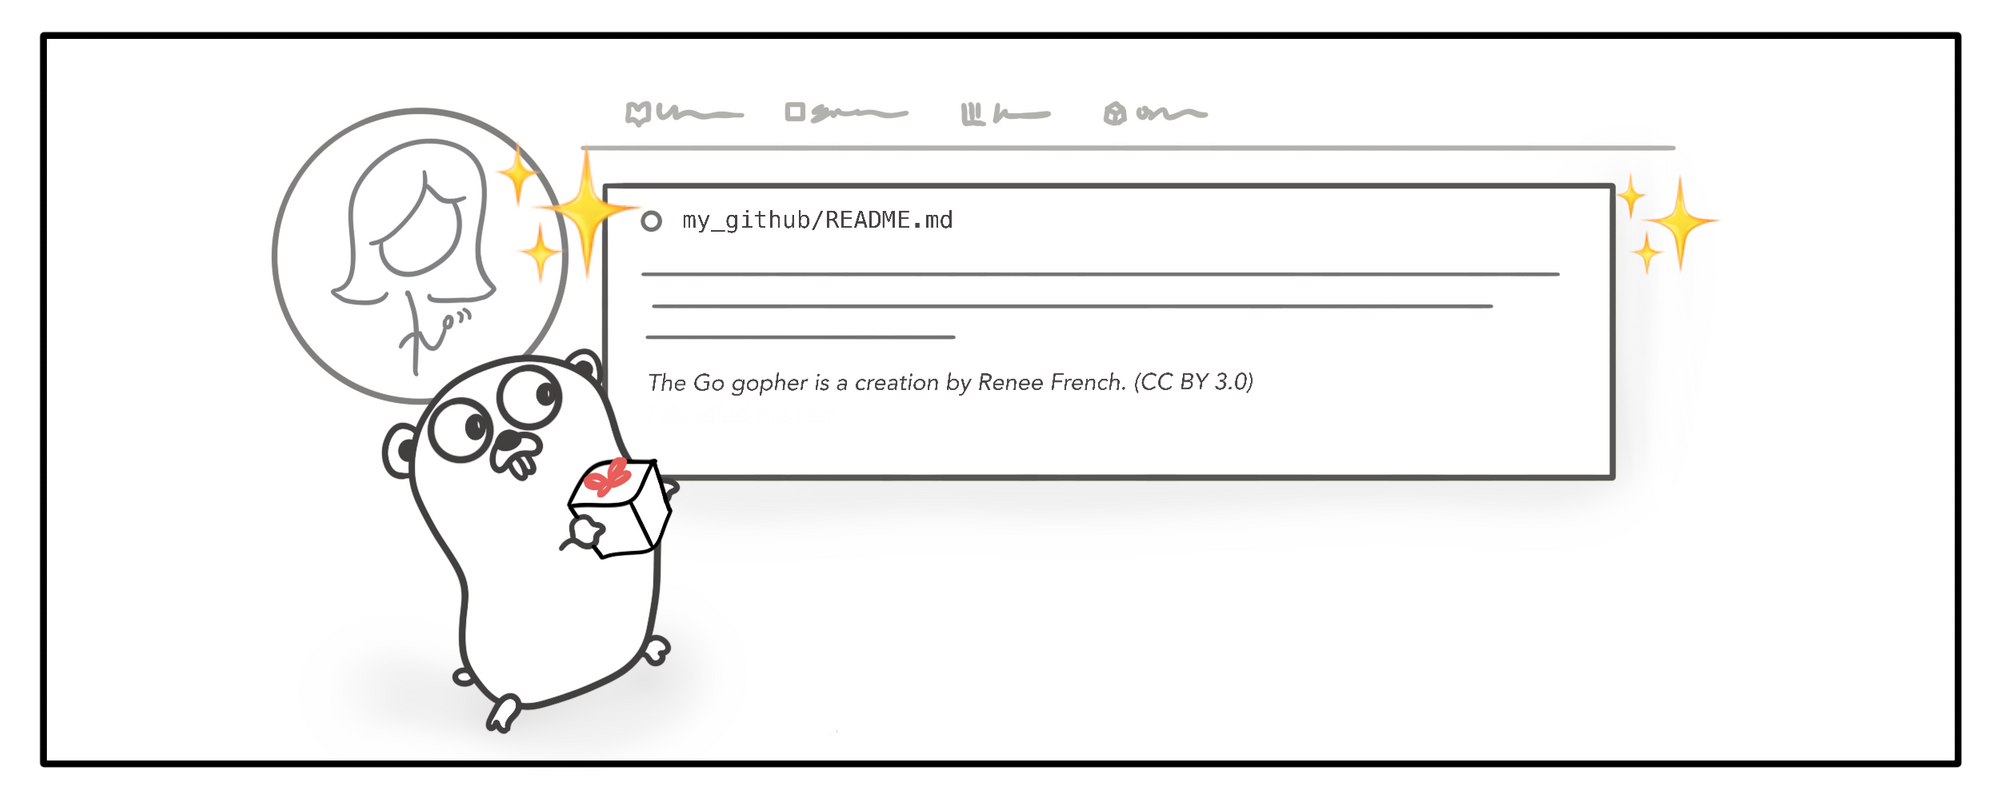 How to Automate Your GitHub Profile README